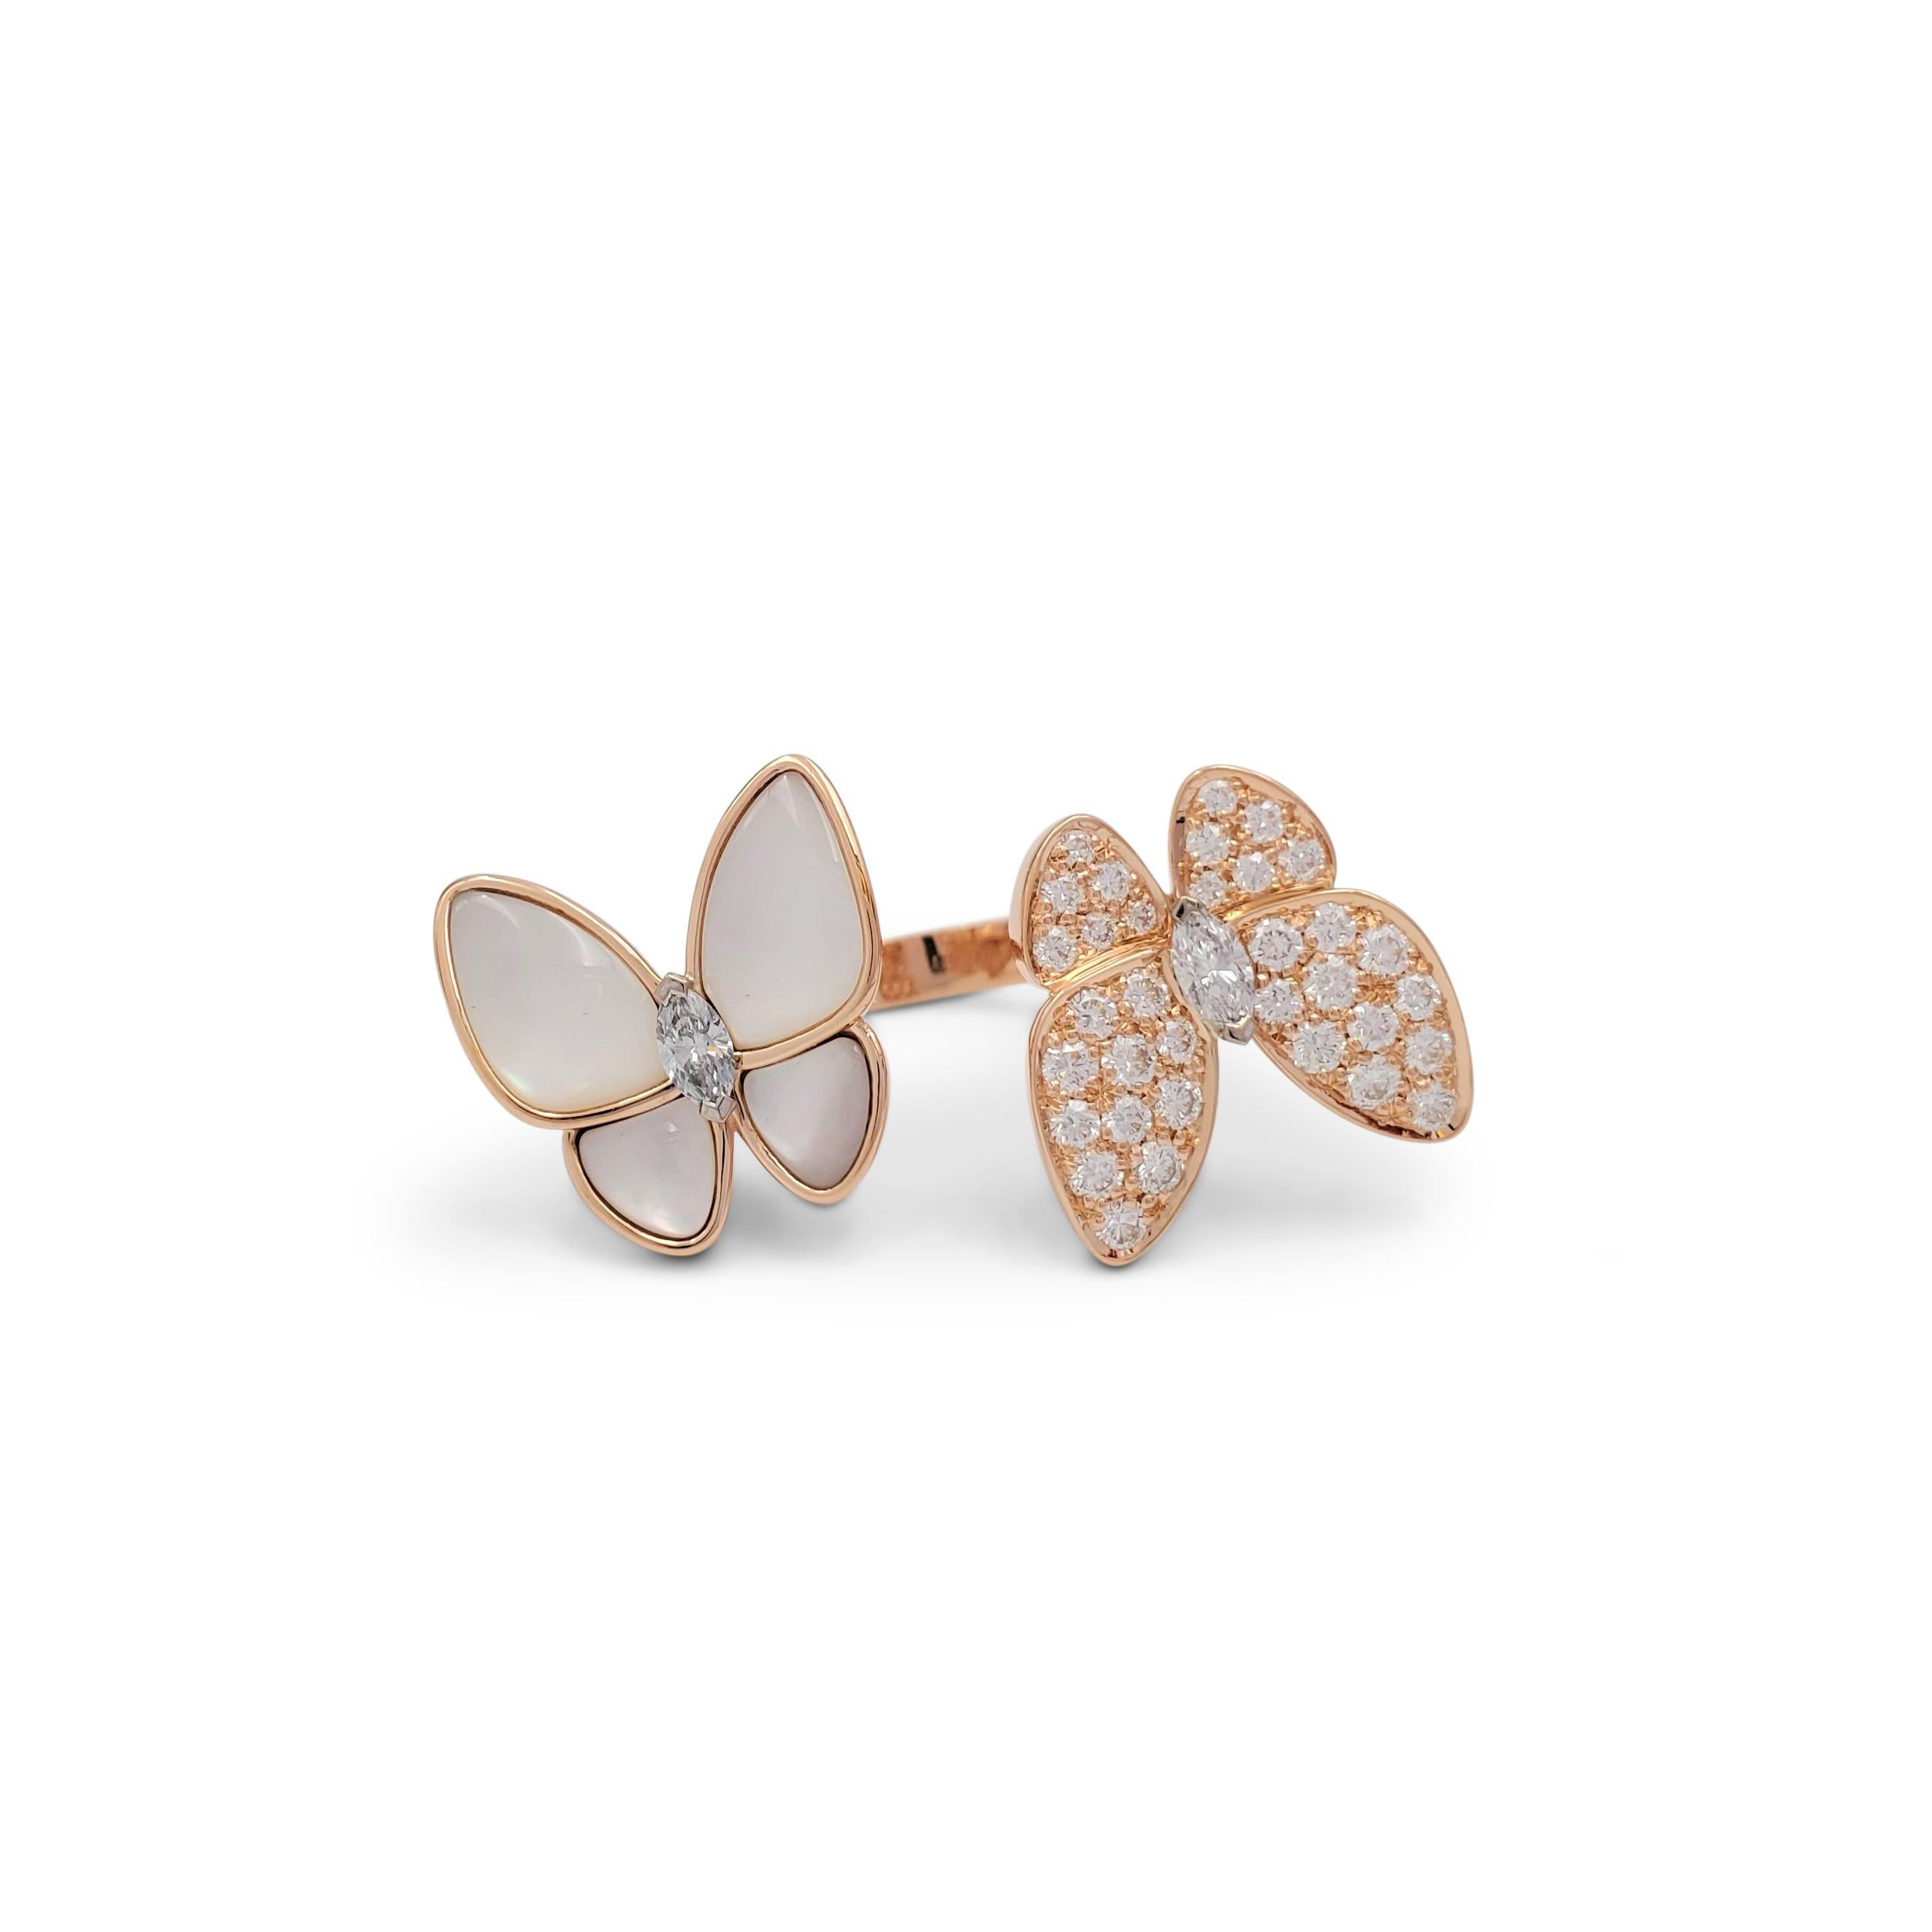 Authentic Van Cleef & Arpels 'Two Butterfly' between-the-finger ring crafted 18 karat rose gold features two butterflies that combine color and asymmetry in a dazzling way. The ring is set with an estimated 1.00 carats of high-quality round